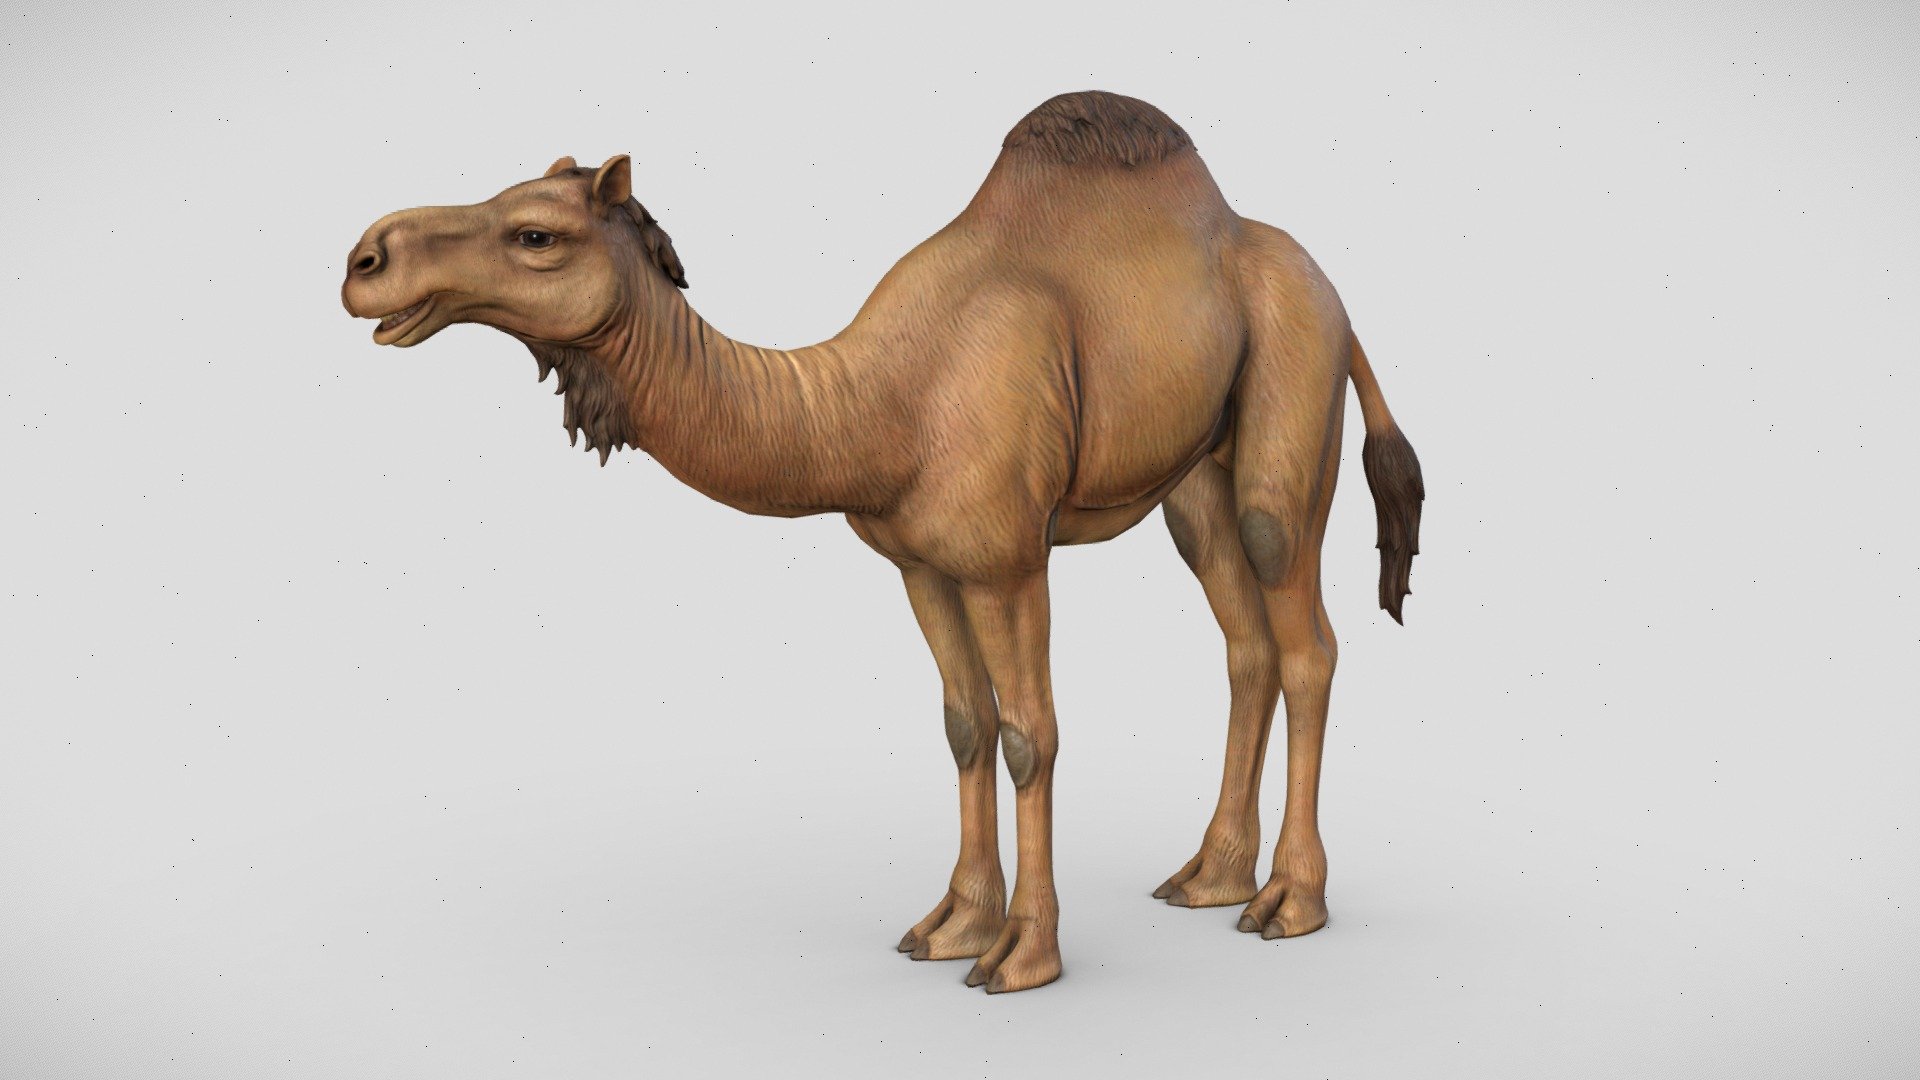 A low-poly Dromedary Camel model with textures.

Normal, Color, Specular/Gloss, Occlusion, and Cavity maps are 4096.

Collada, FBX, and OBJ formats included 3d model